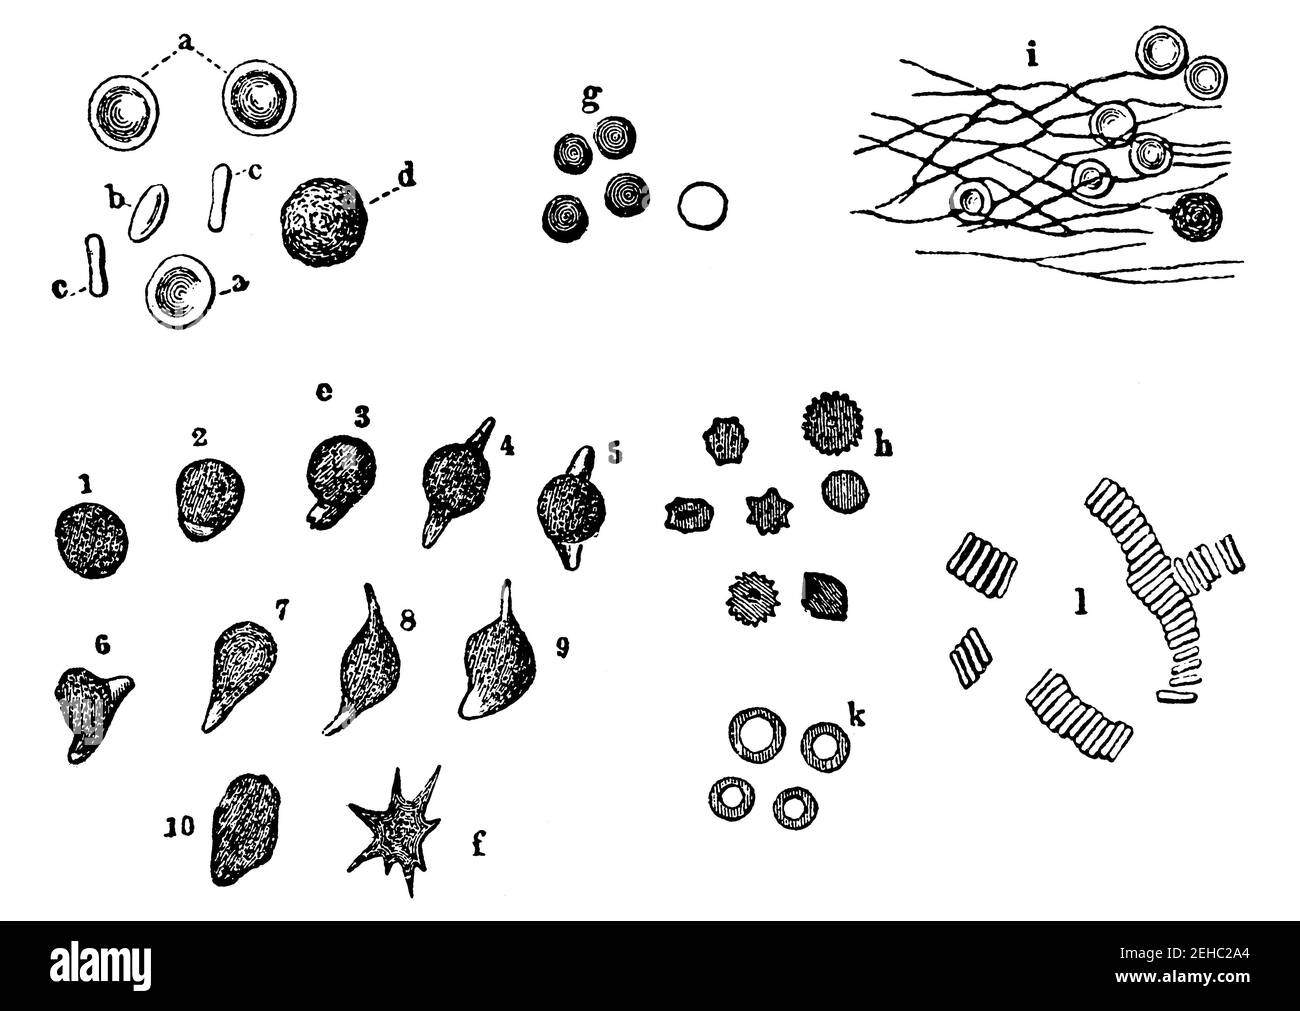 Human blood cells, seen through the microscope. Illustration of the 19th century. Germany. White background. Stock Photo